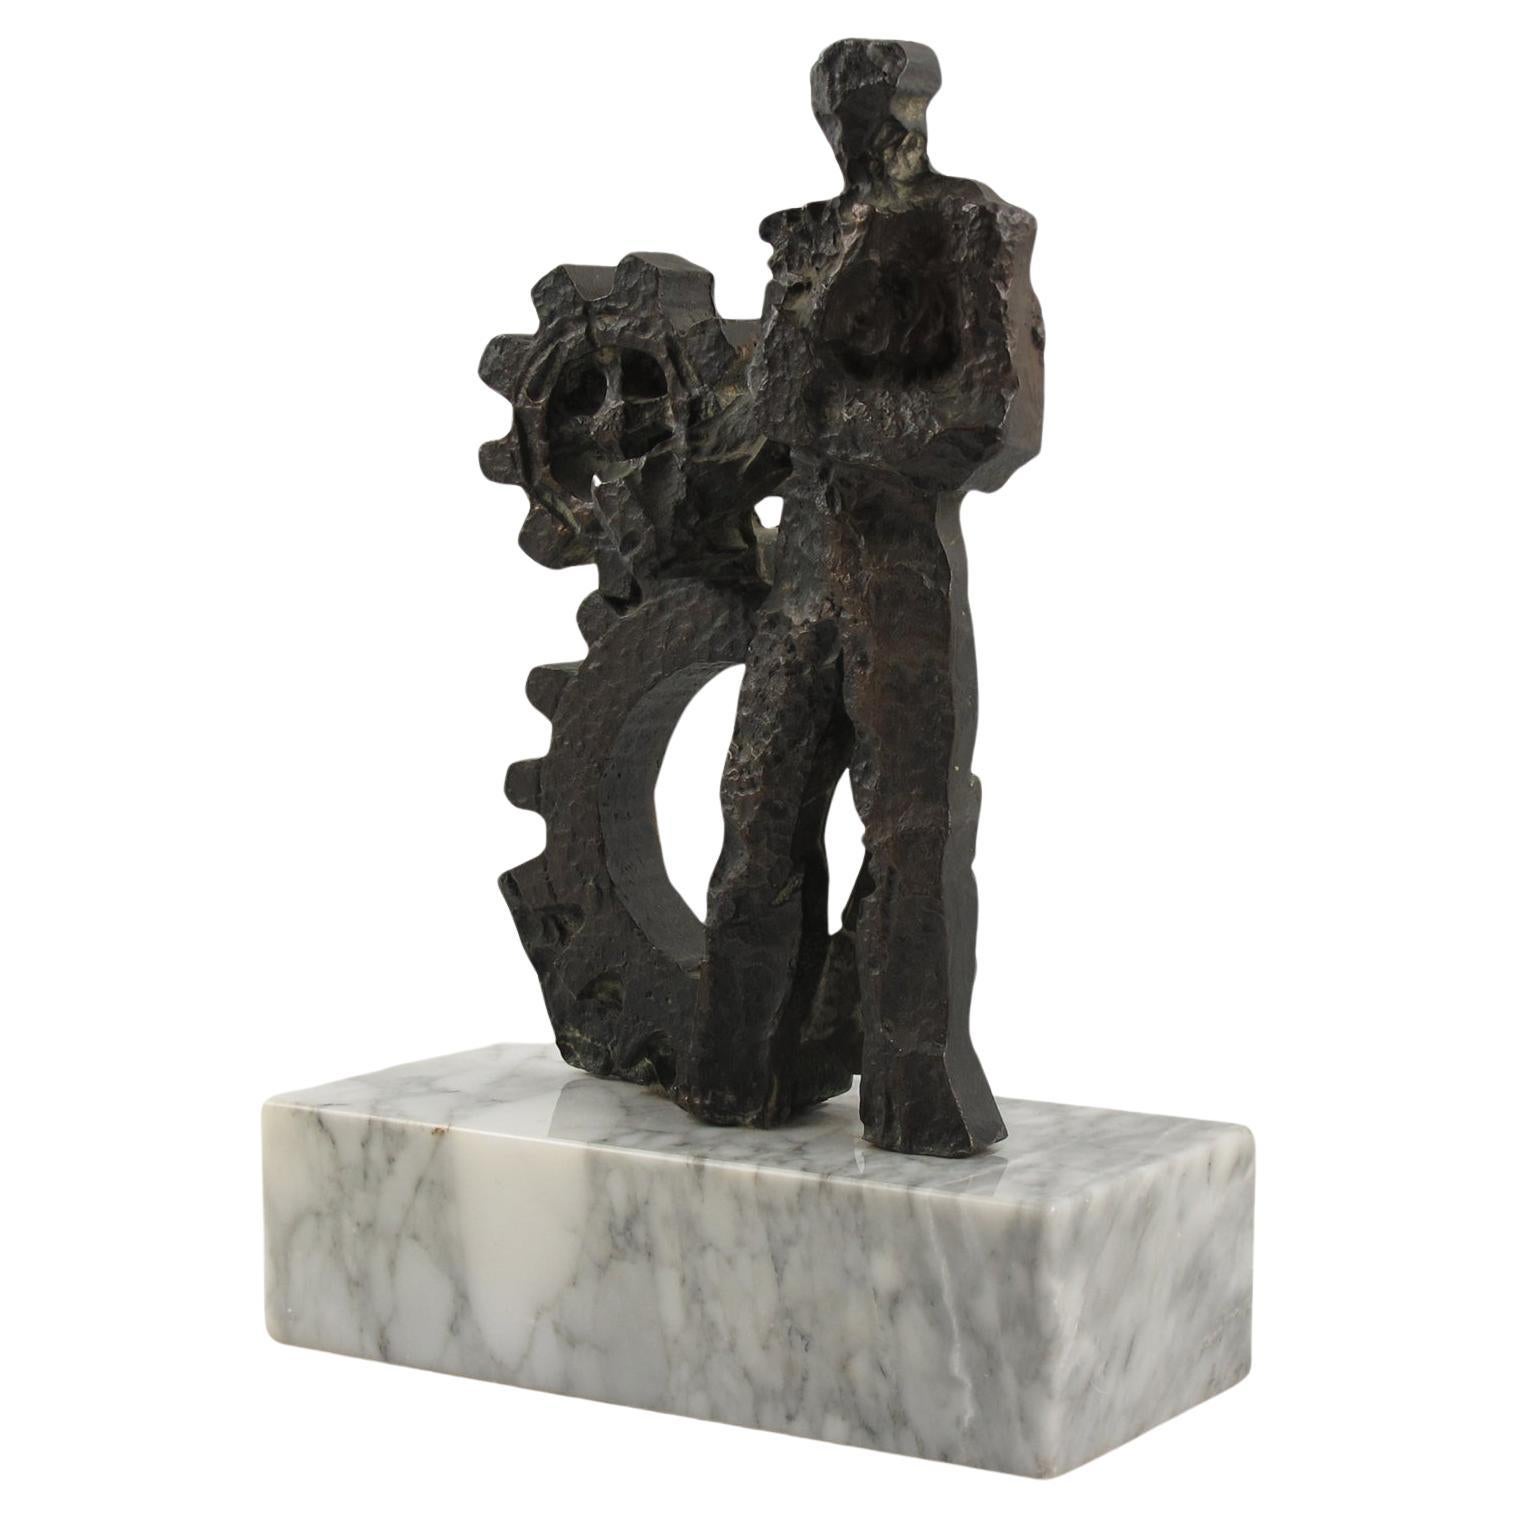 Brutalist Bronze Sculpture on Marble Base, Man and Machine, 1970s For Sale